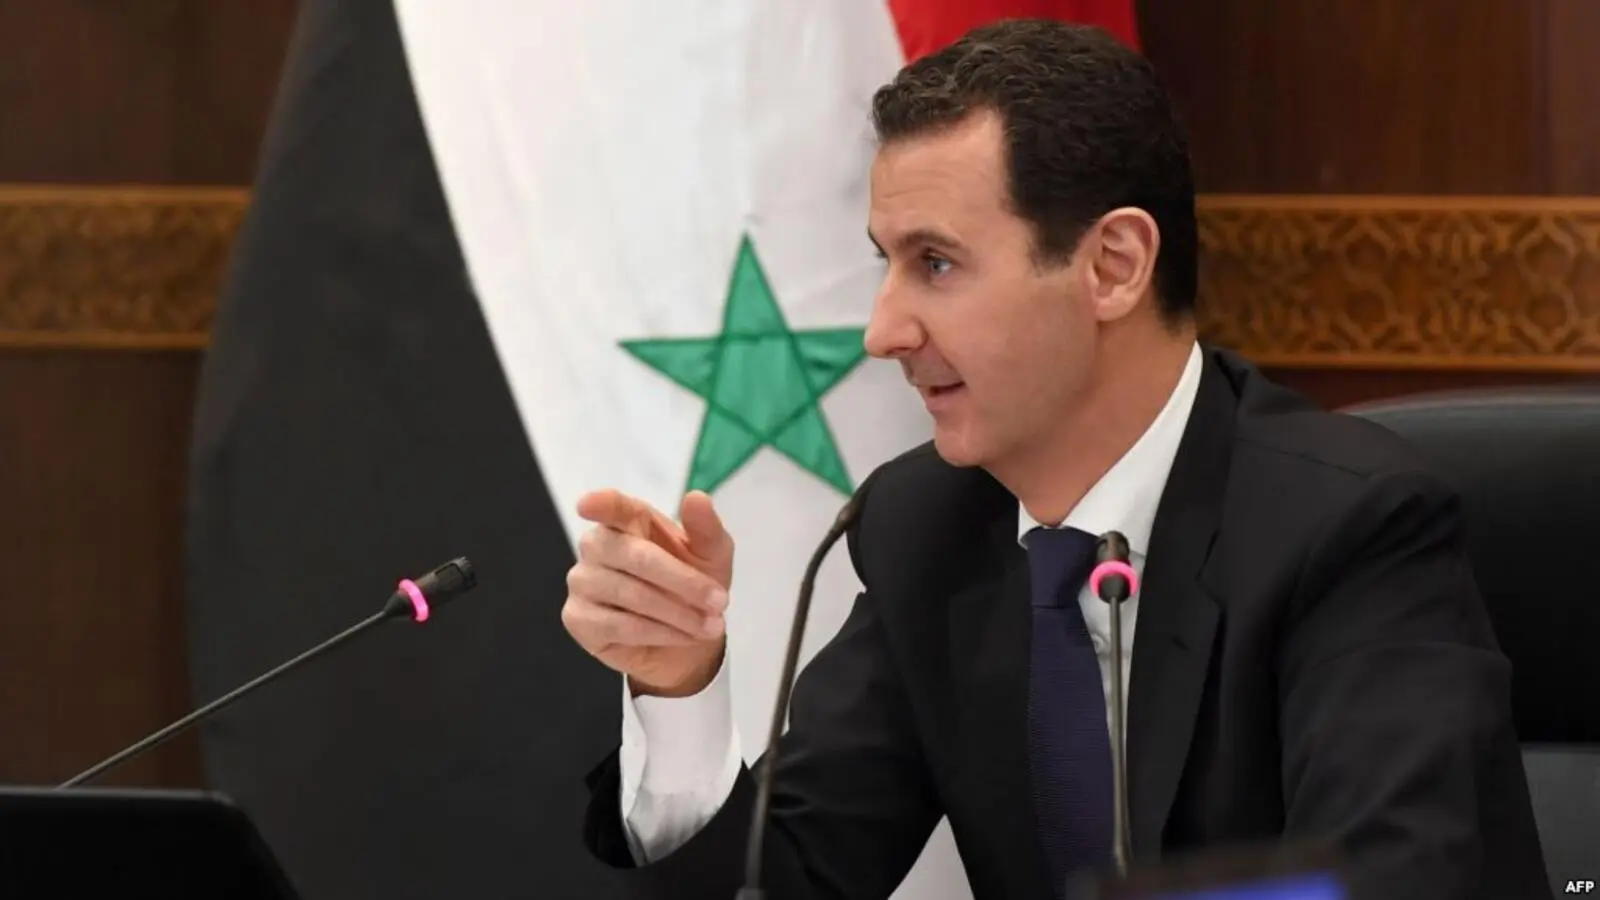 Syria’s Return To The Arab League Raises More Questions